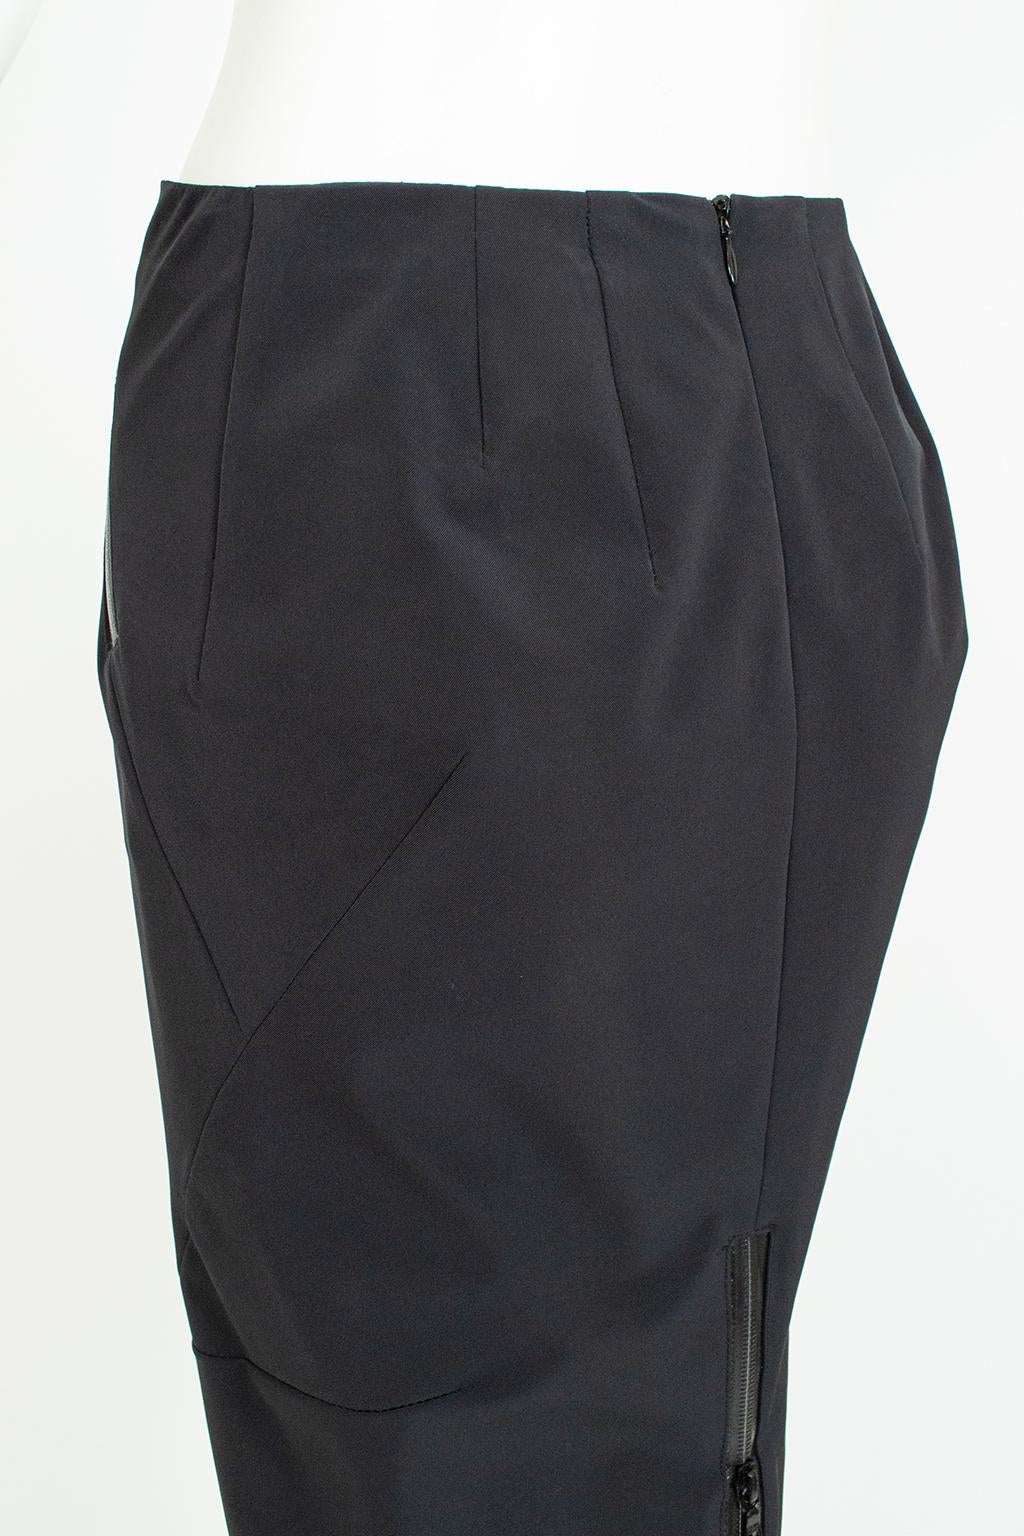 New Prada Black Corset-Seam Pencil Skirt with Vinyl Zippers and Vent – S, 2001 For Sale 1